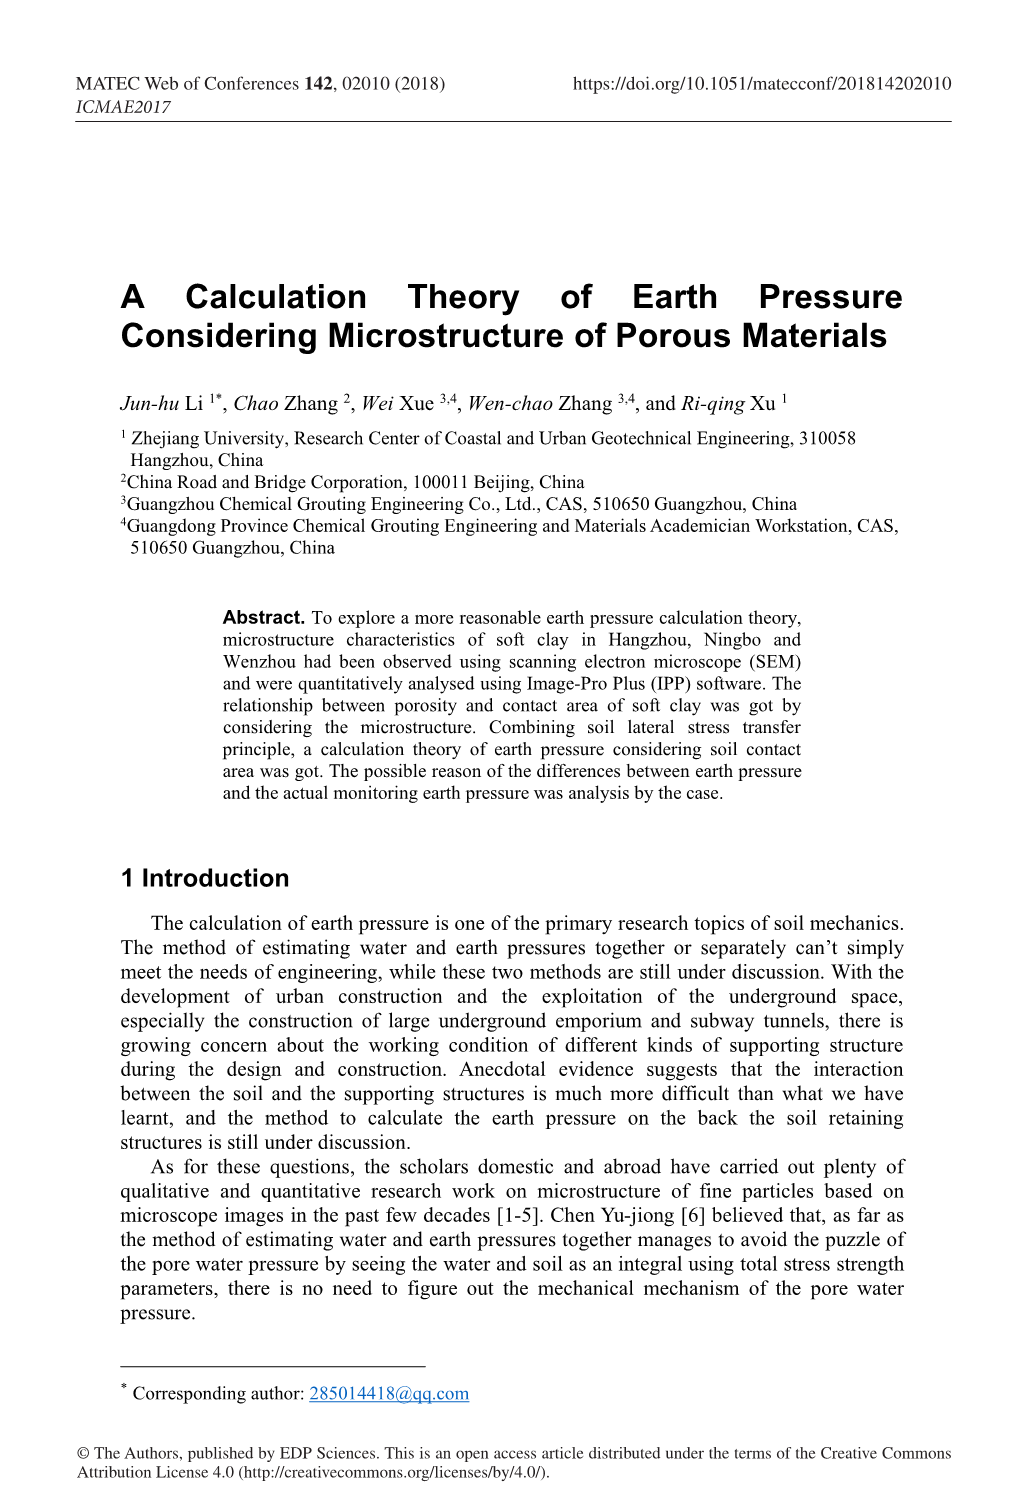 A Calculation Theory of Earth Pressure Considering Microstructure of Porous Materials